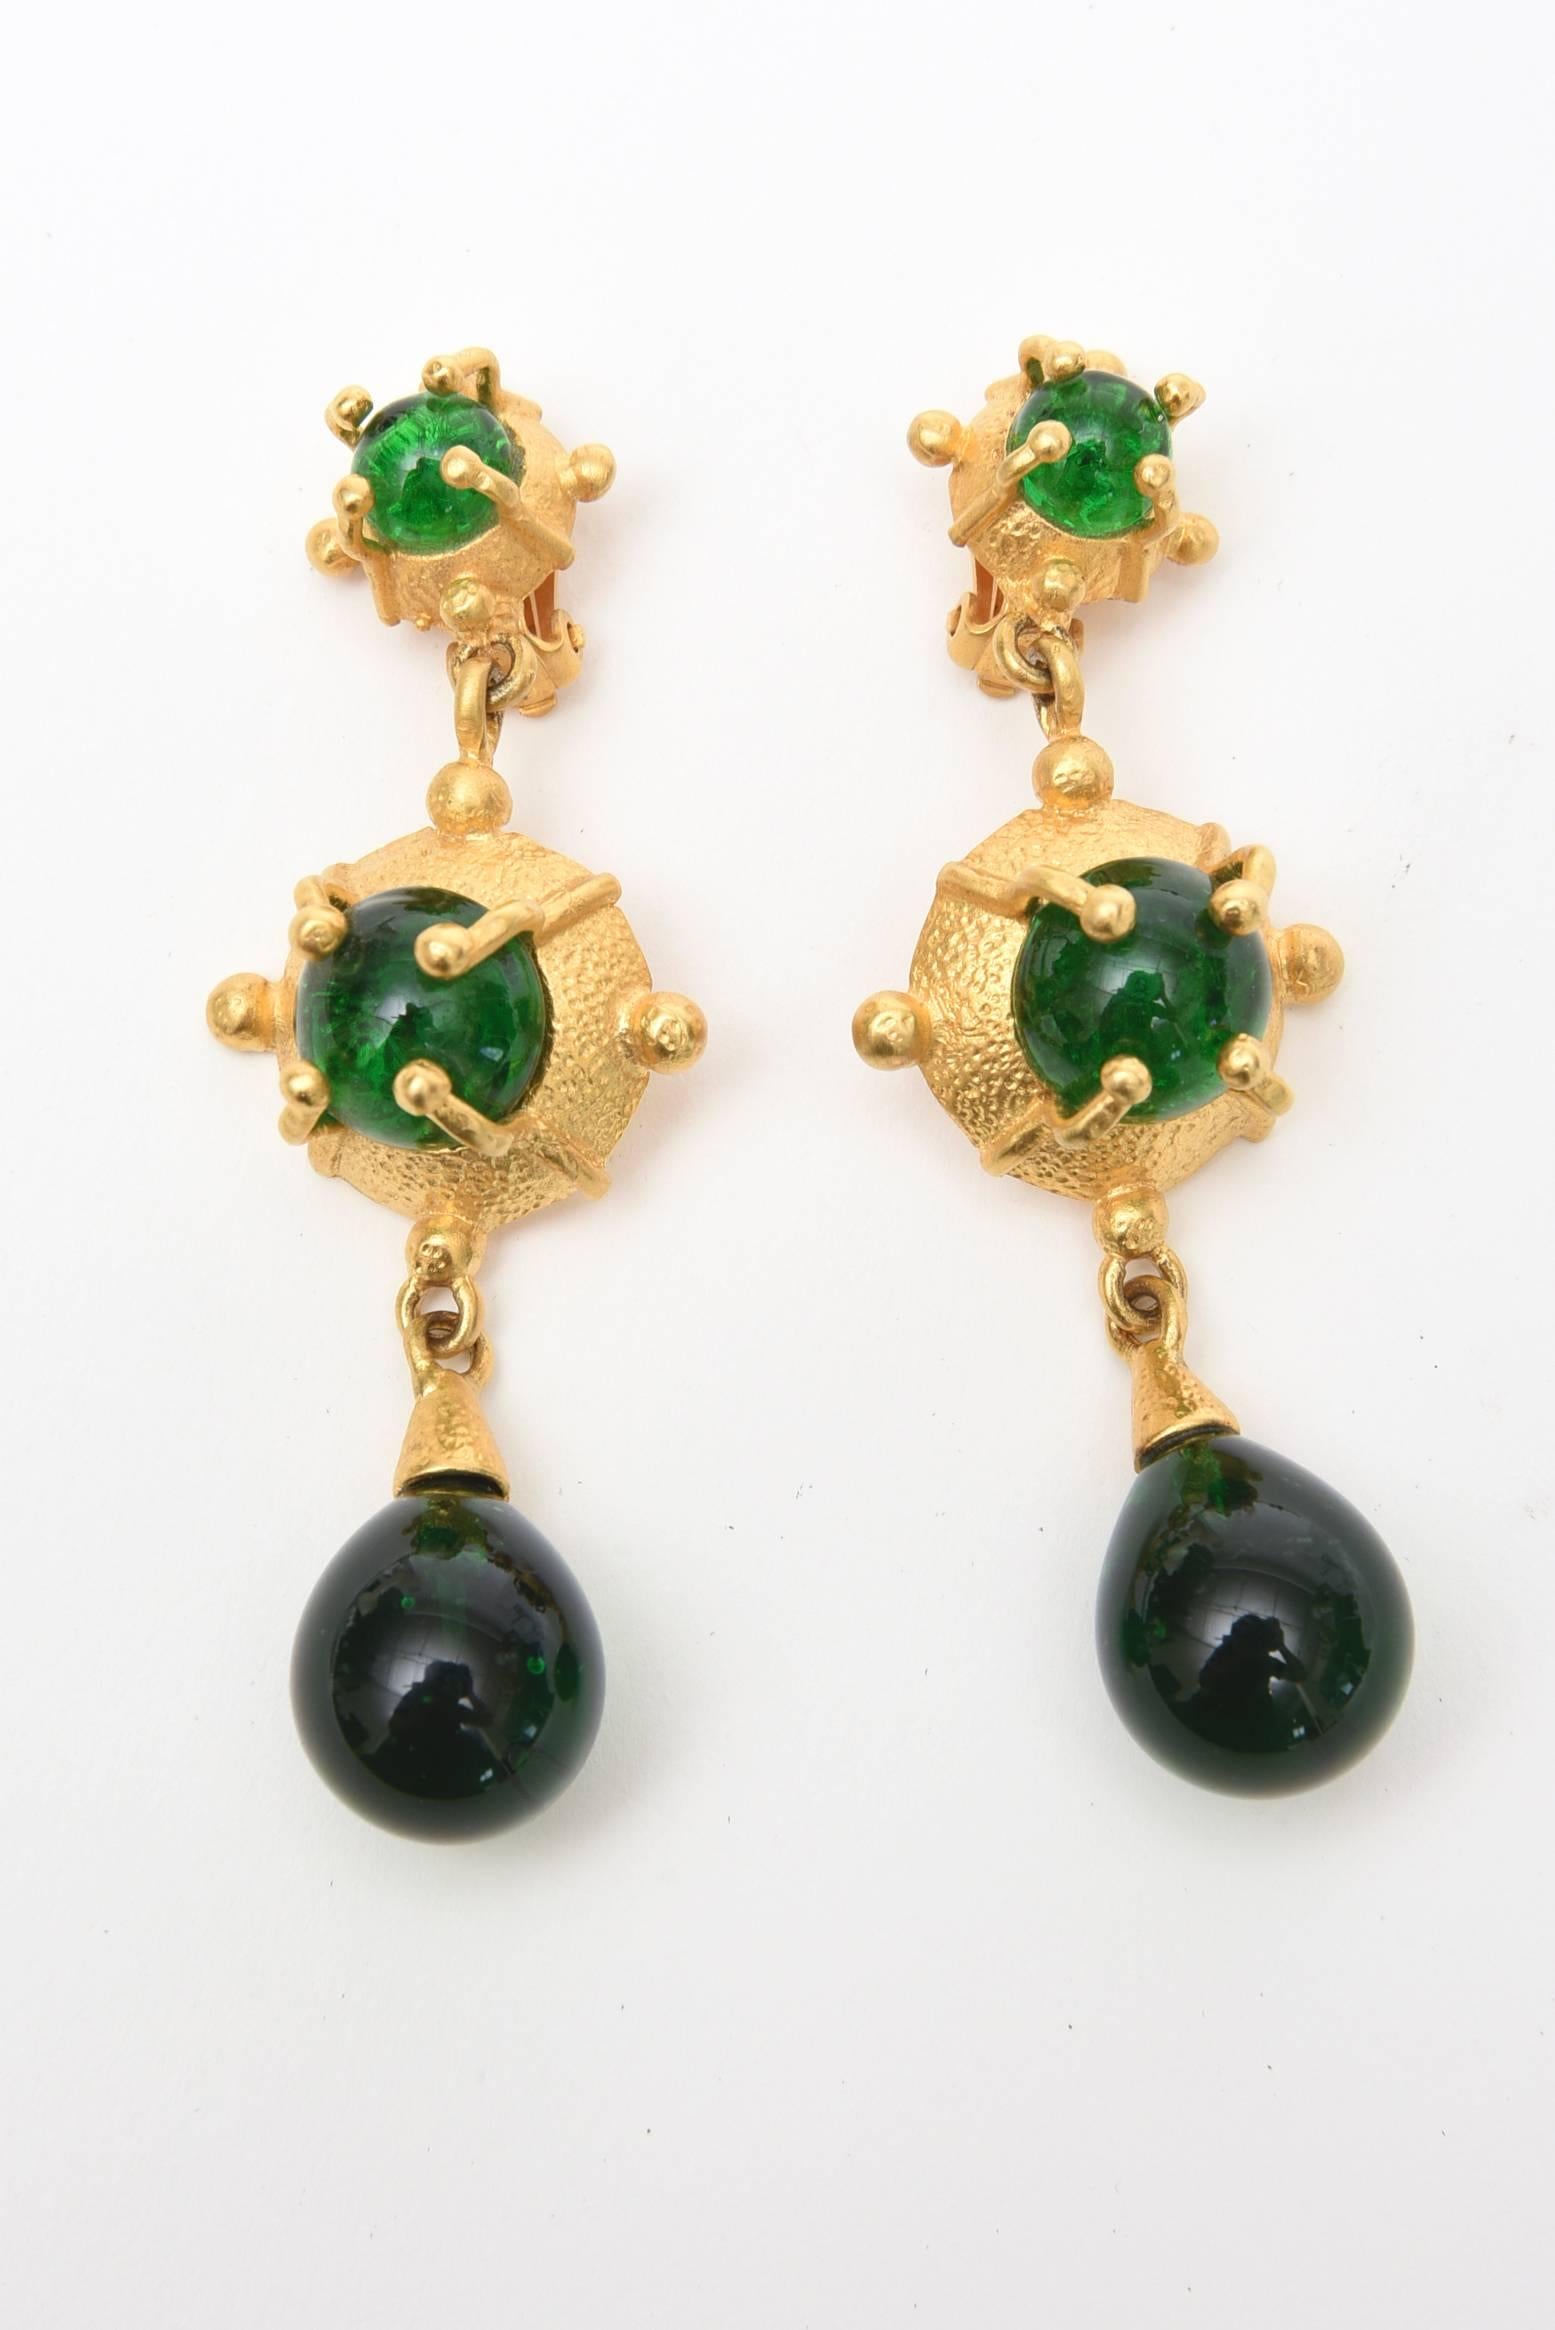  Andrew Spingarn Gold Plated With Green Glass Sculptural Necklace, Earrings Set For Sale 3